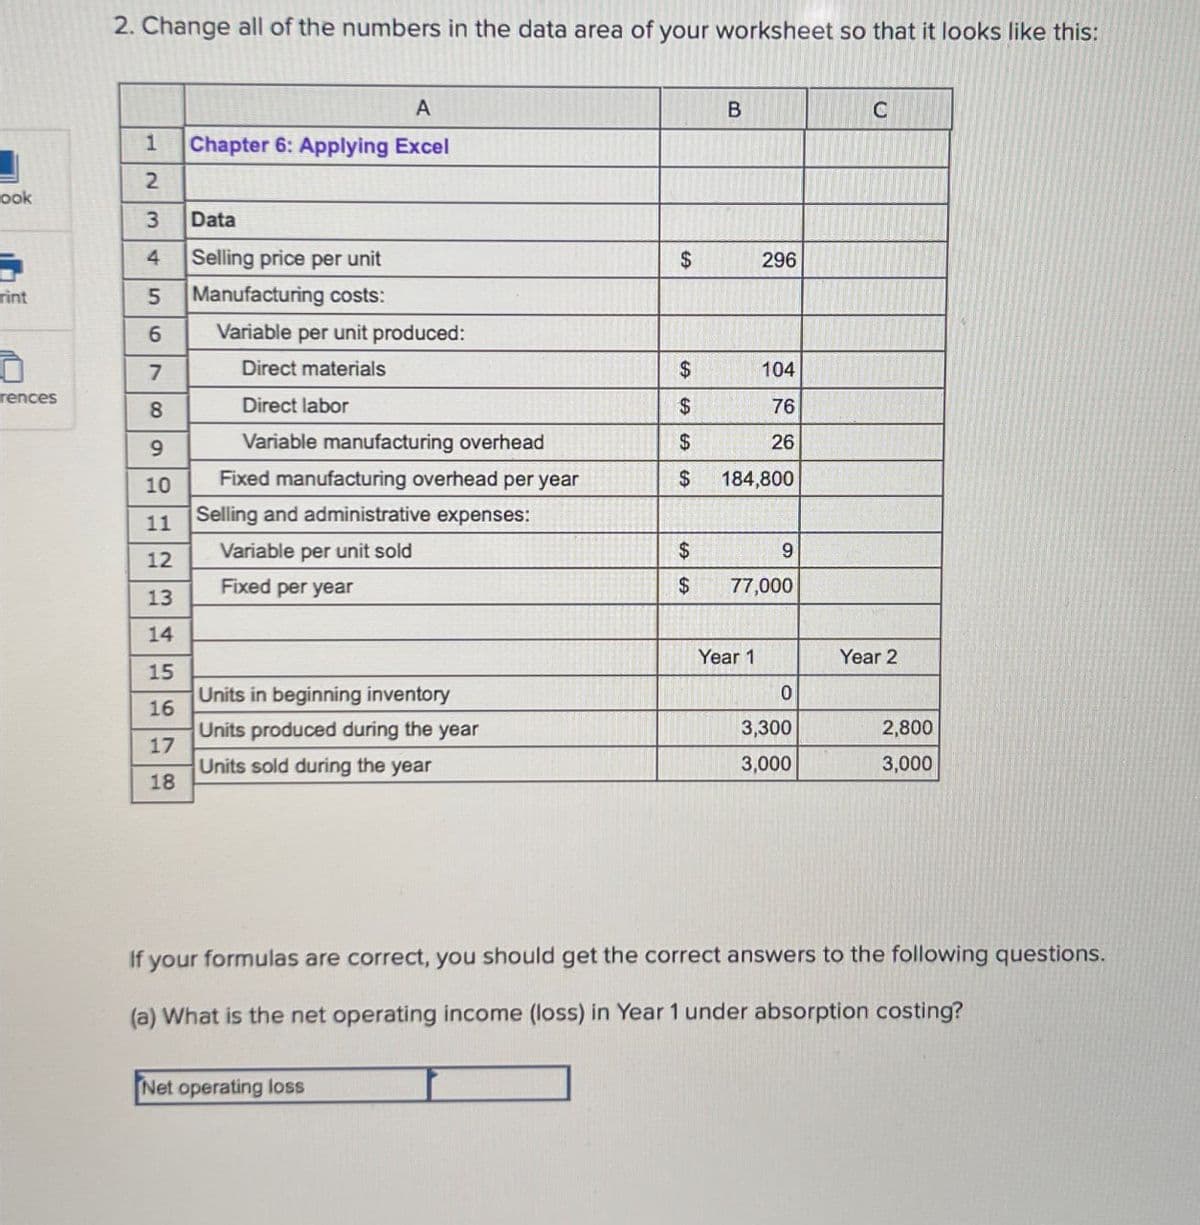 2. Change all of the numbers in the data area of your worksheet so that it looks like this:
A
1
Chapter 6: Applying Excel
2
ook
3
Data
rint
456
Selling price per unit
Manufacturing costs:
Variable per unit produced:
B
C
$
296
7
Direct materials
$
104
rences
8
9
10
11
B12345
Direct labor
$
76
Variable manufacturing overhead
$
26
Fixed manufacturing overhead per year
$
184,800
Selling and administrative expenses:
Variable per unit sold
$
9
Fixed per year
$
77,000
Units in beginning inventory
16
Units produced during the year
17
Units sold during the year
18
Year 1
Year 2
0
3,300
2,800
3,000
3,000
If your formulas are correct, you should get the correct answers to the following questions.
(a) What is the net operating income (loss) in Year 1 under absorption costing?
Net operating loss